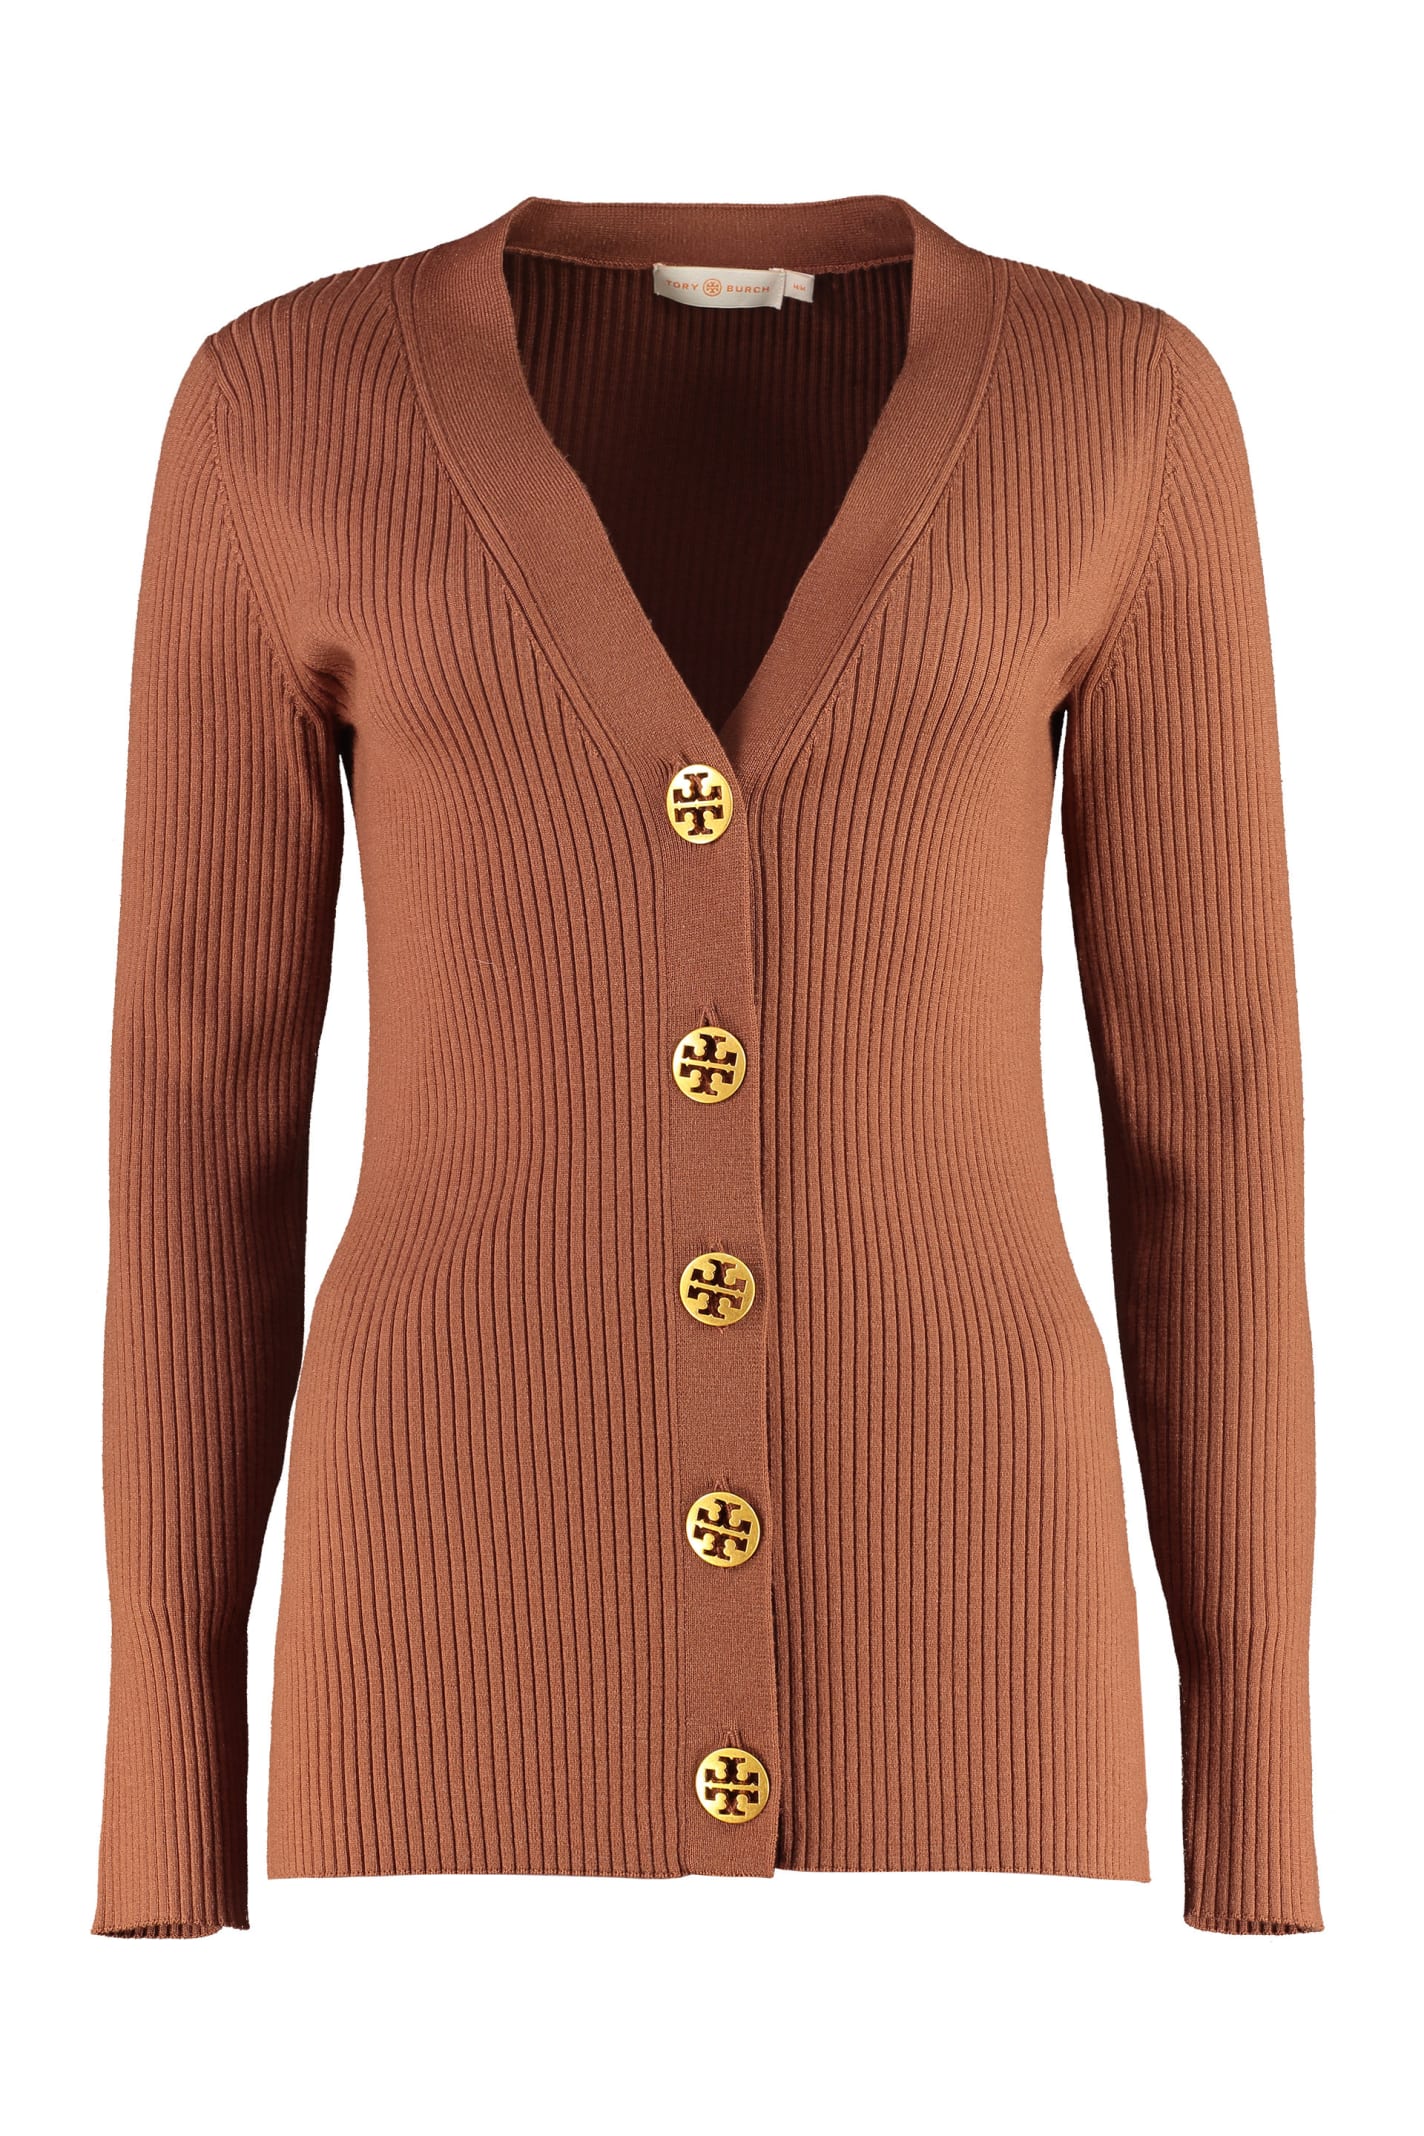 Tory Burch Simone Wool Cardigan With Decorative Buttons